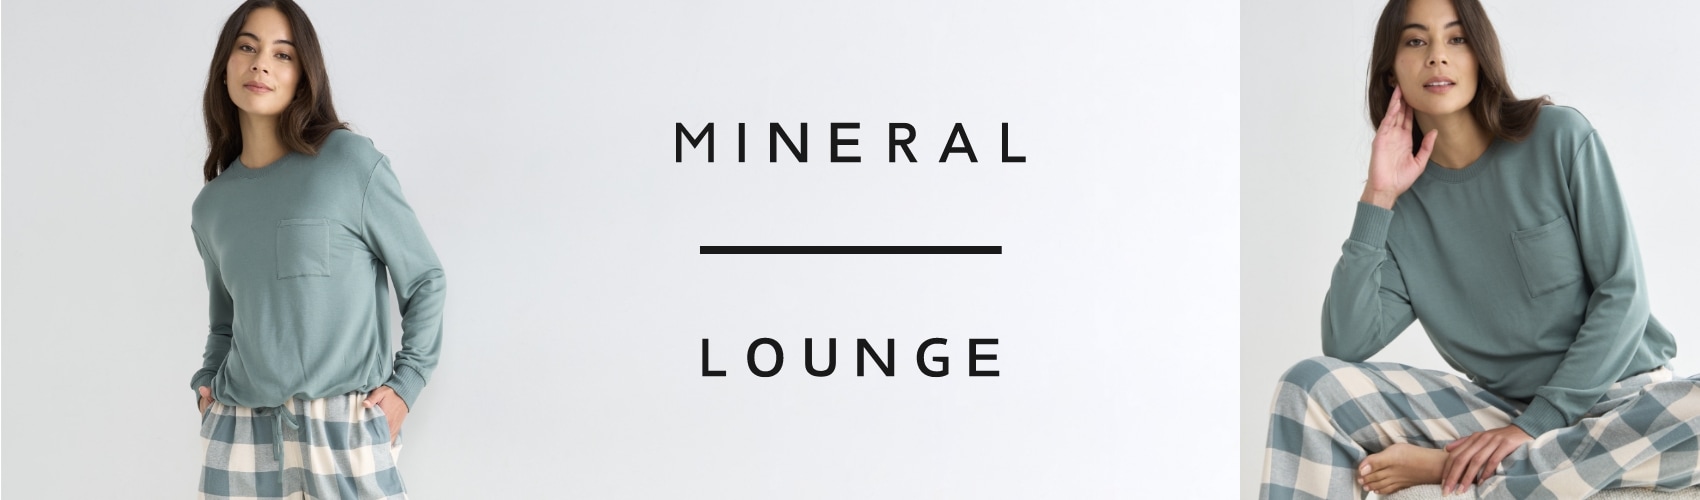 Mineral lounge